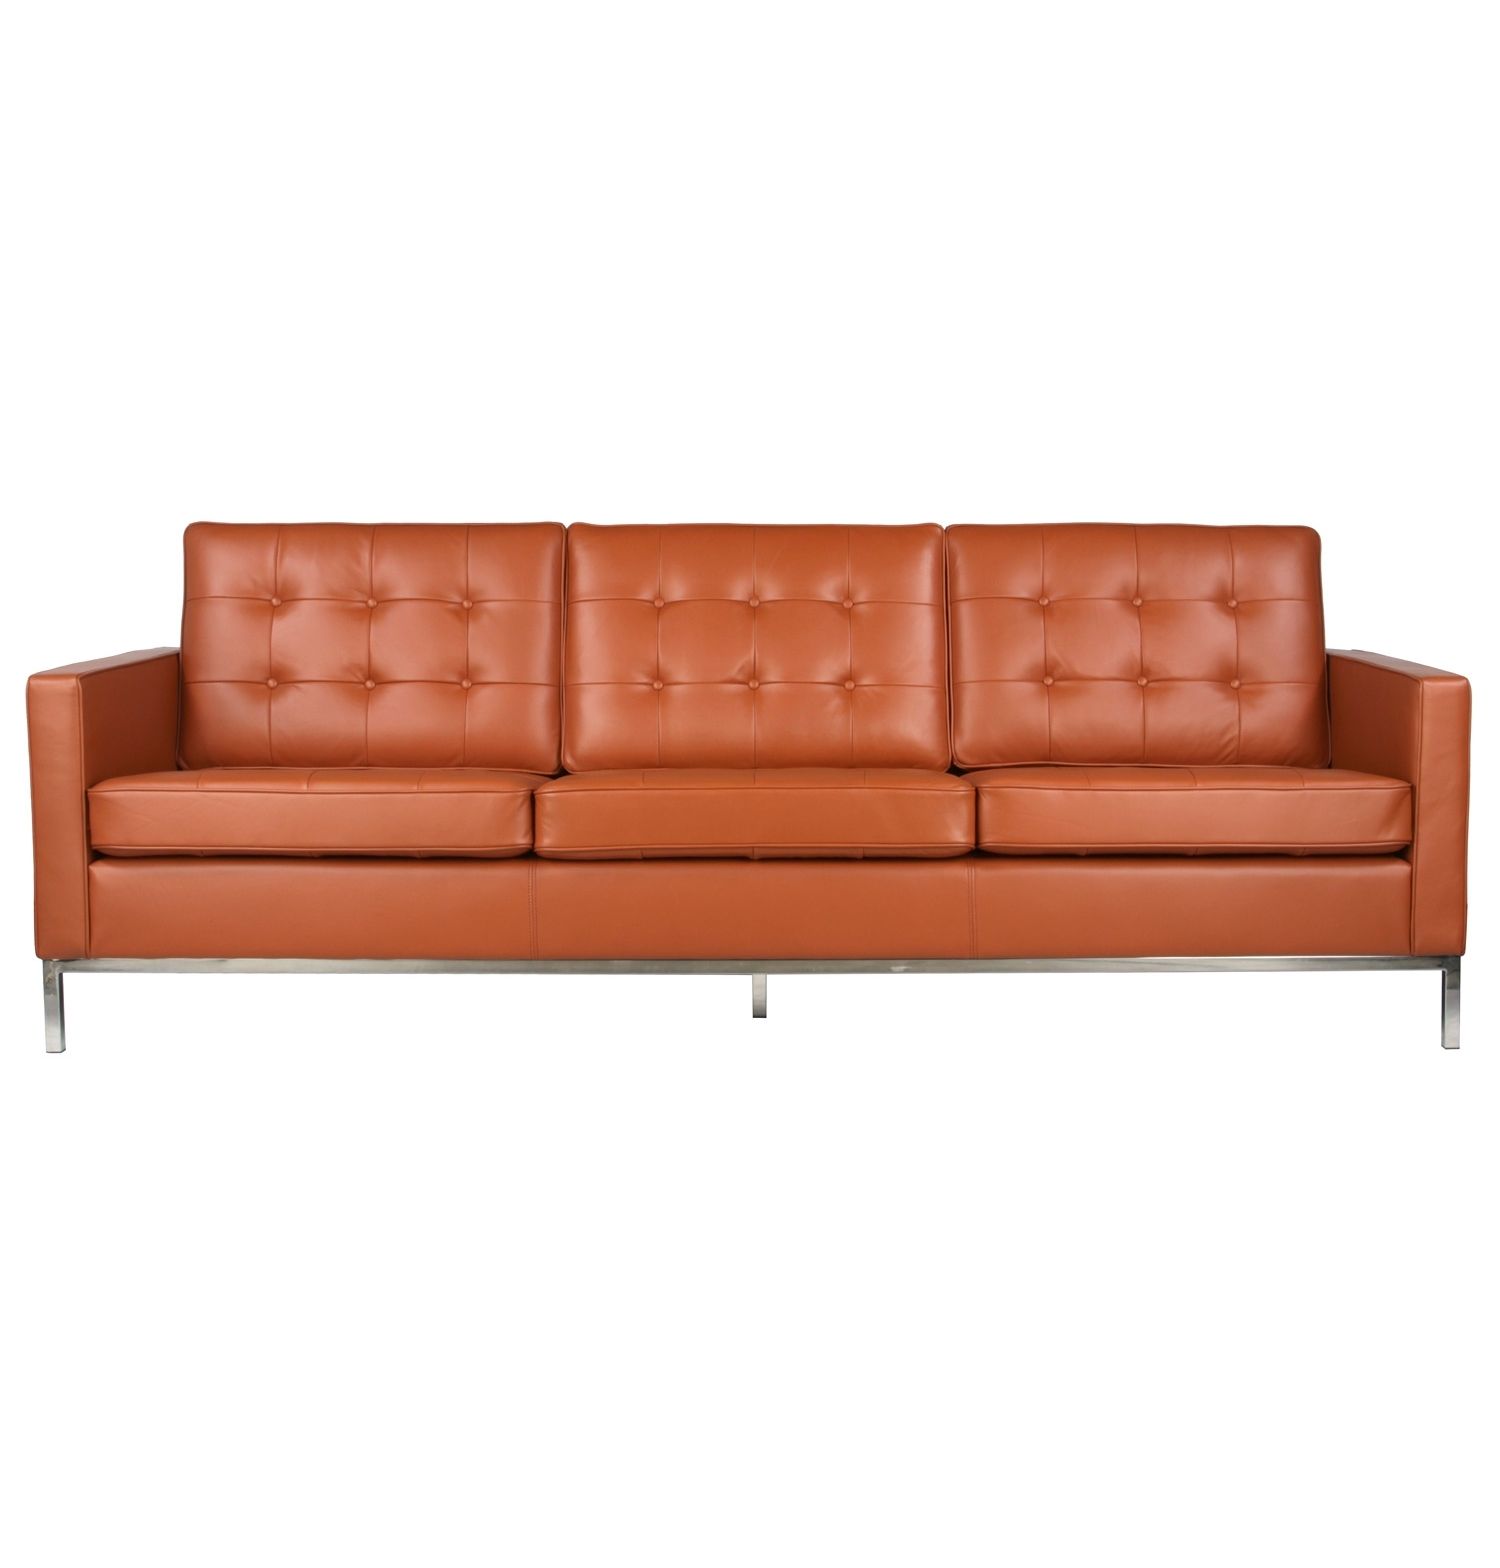 Replica Florence Knoll Aniline Leather 3 Seater Sofa Premium Throughout Florence Knoll 3 Seater Sofas (View 13 of 15)